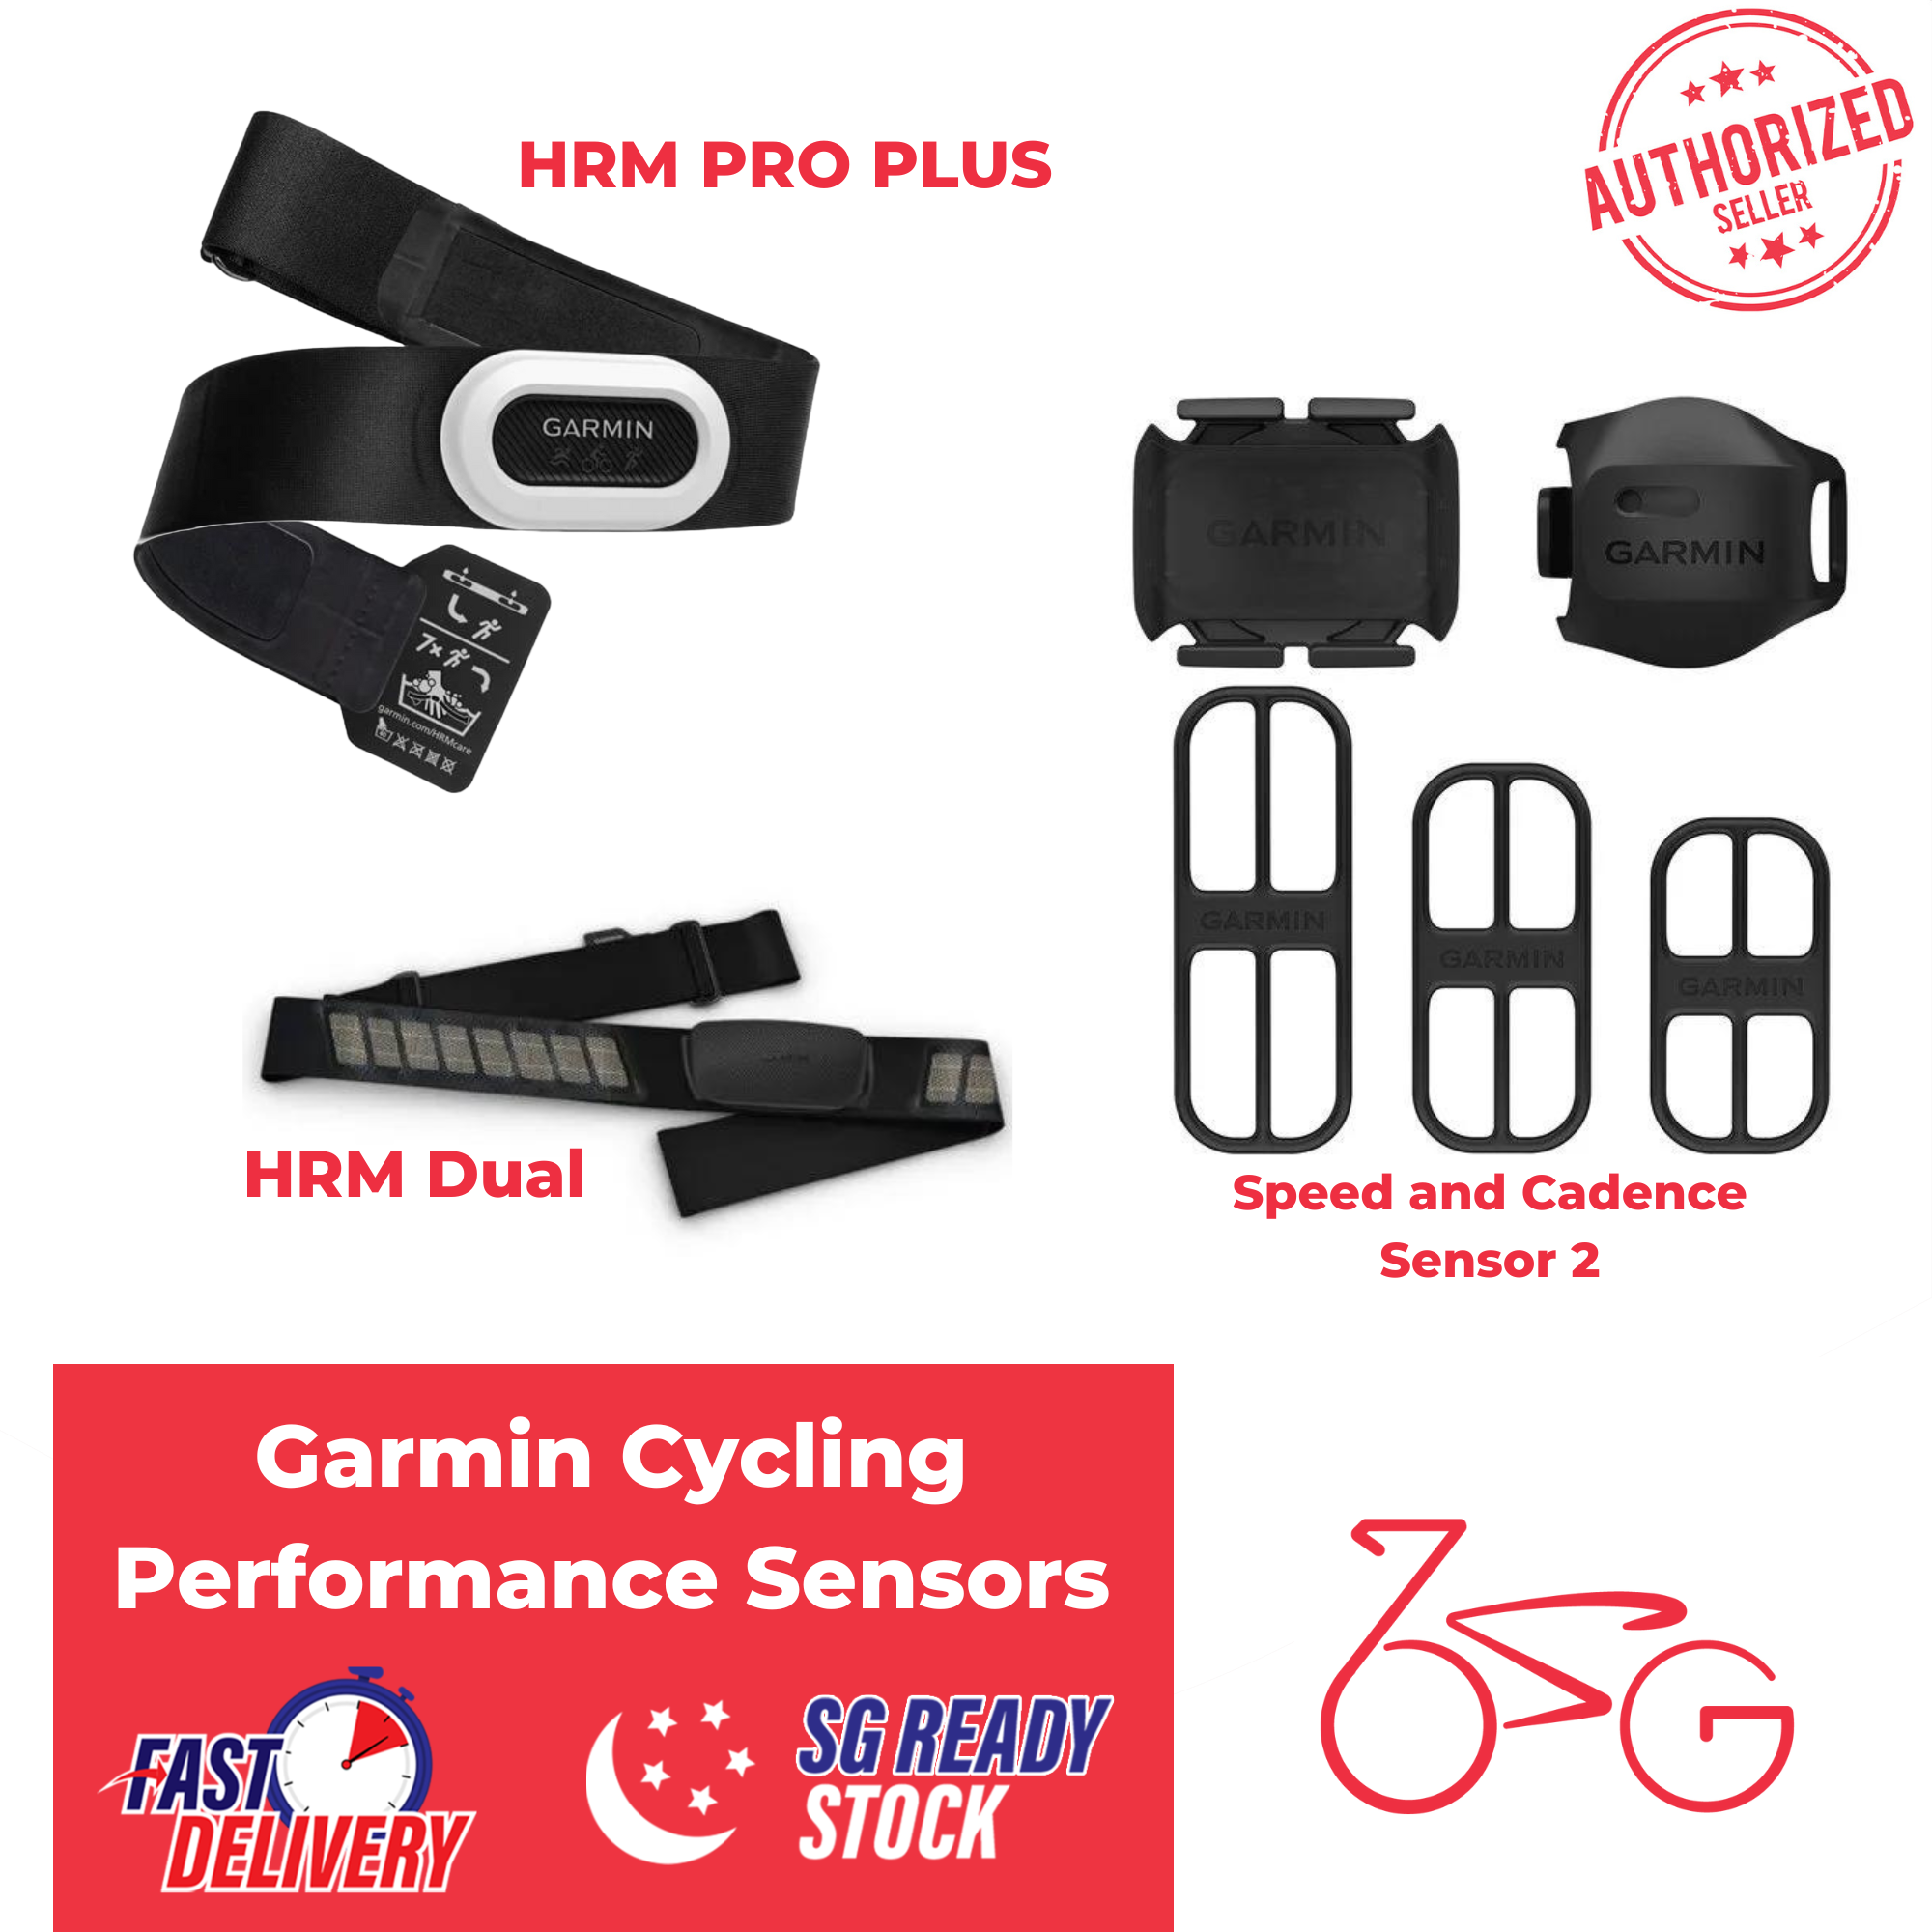 Garmin HRM-Pro Plus Premium Heart Rate Monitor with Dual